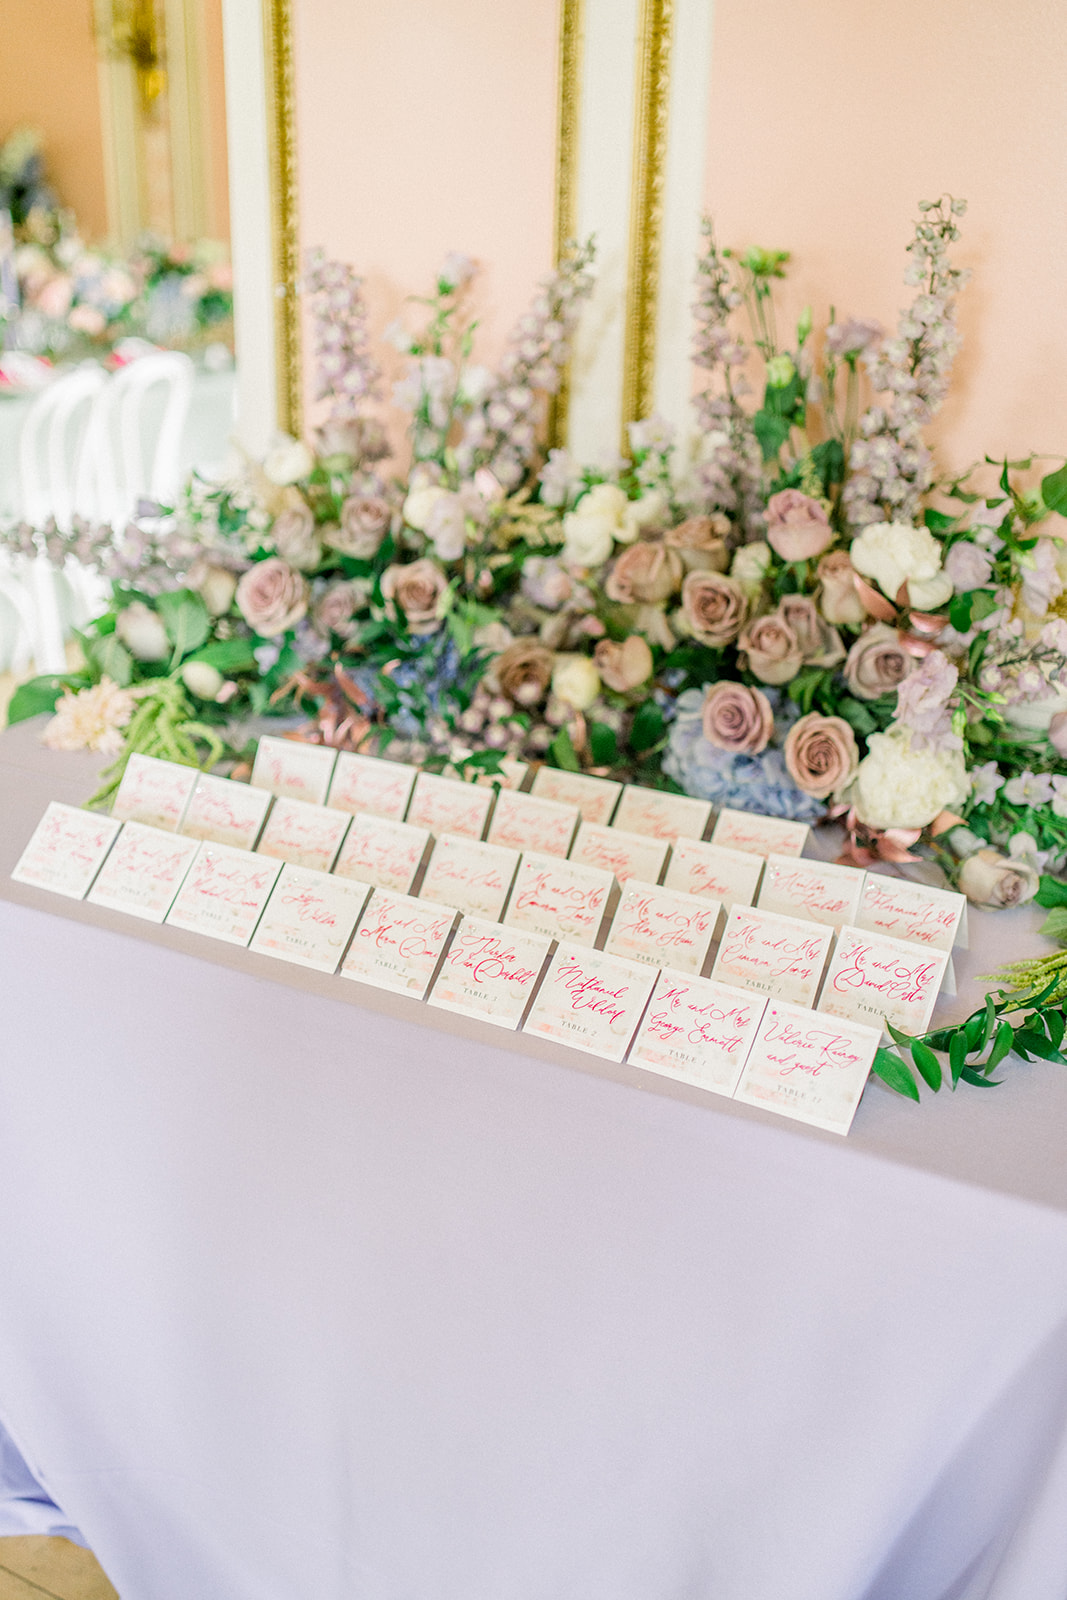 Custom wedding favor tags with calligraphy on a green silk ribbon, adding a personal touch to a luxury wedding